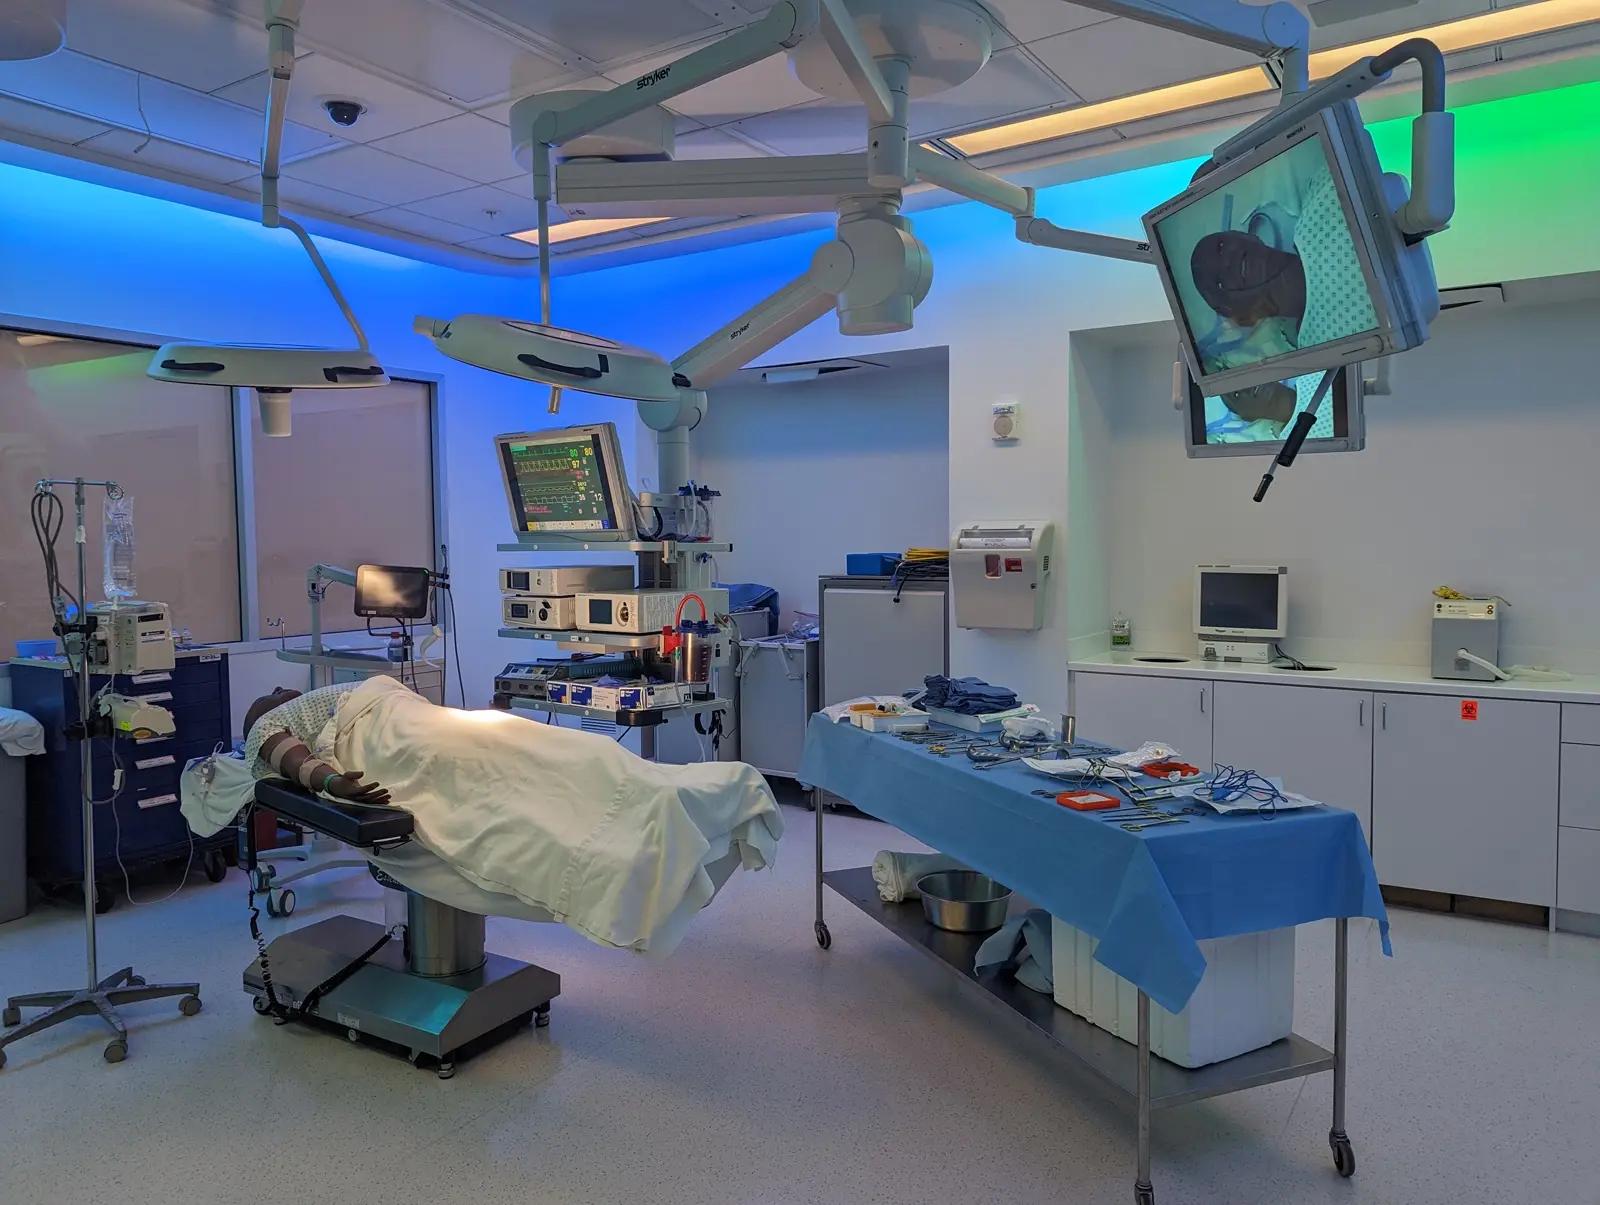 CAMLS A modern operating room with advanced medical equipment. An empty patient bed is covered with a white sheet. Monitors and surgical tools are arranged neatly. The lighting has a calming blue and green hue, and sterile draped tables are set up for a procedure.